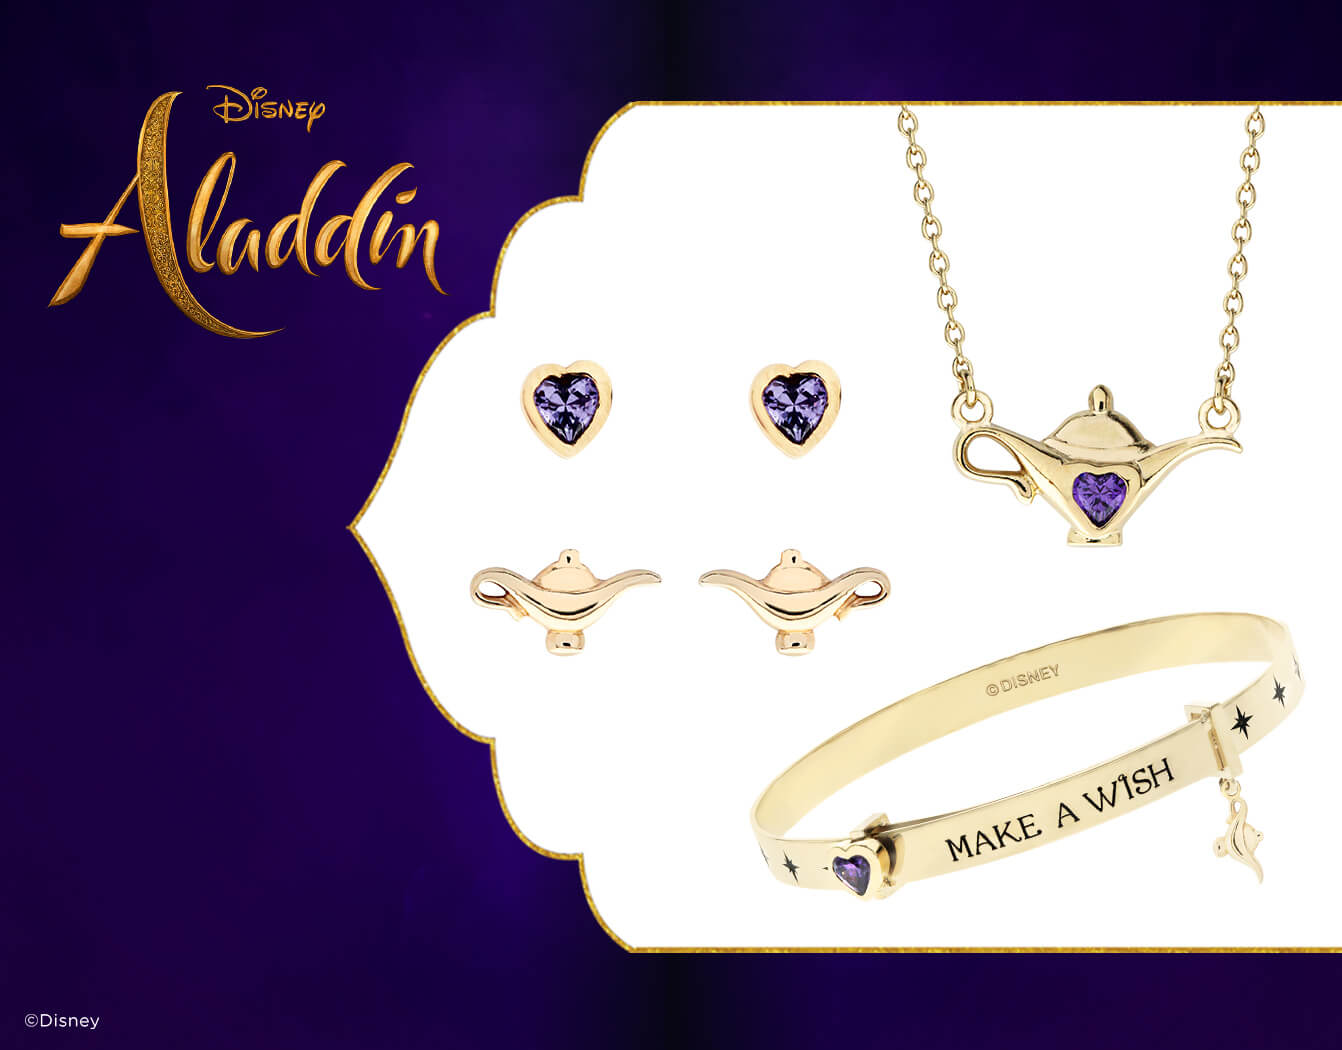 Shop Disney Jewellery, Watches, Gifts and Collectibles | H.Samuel